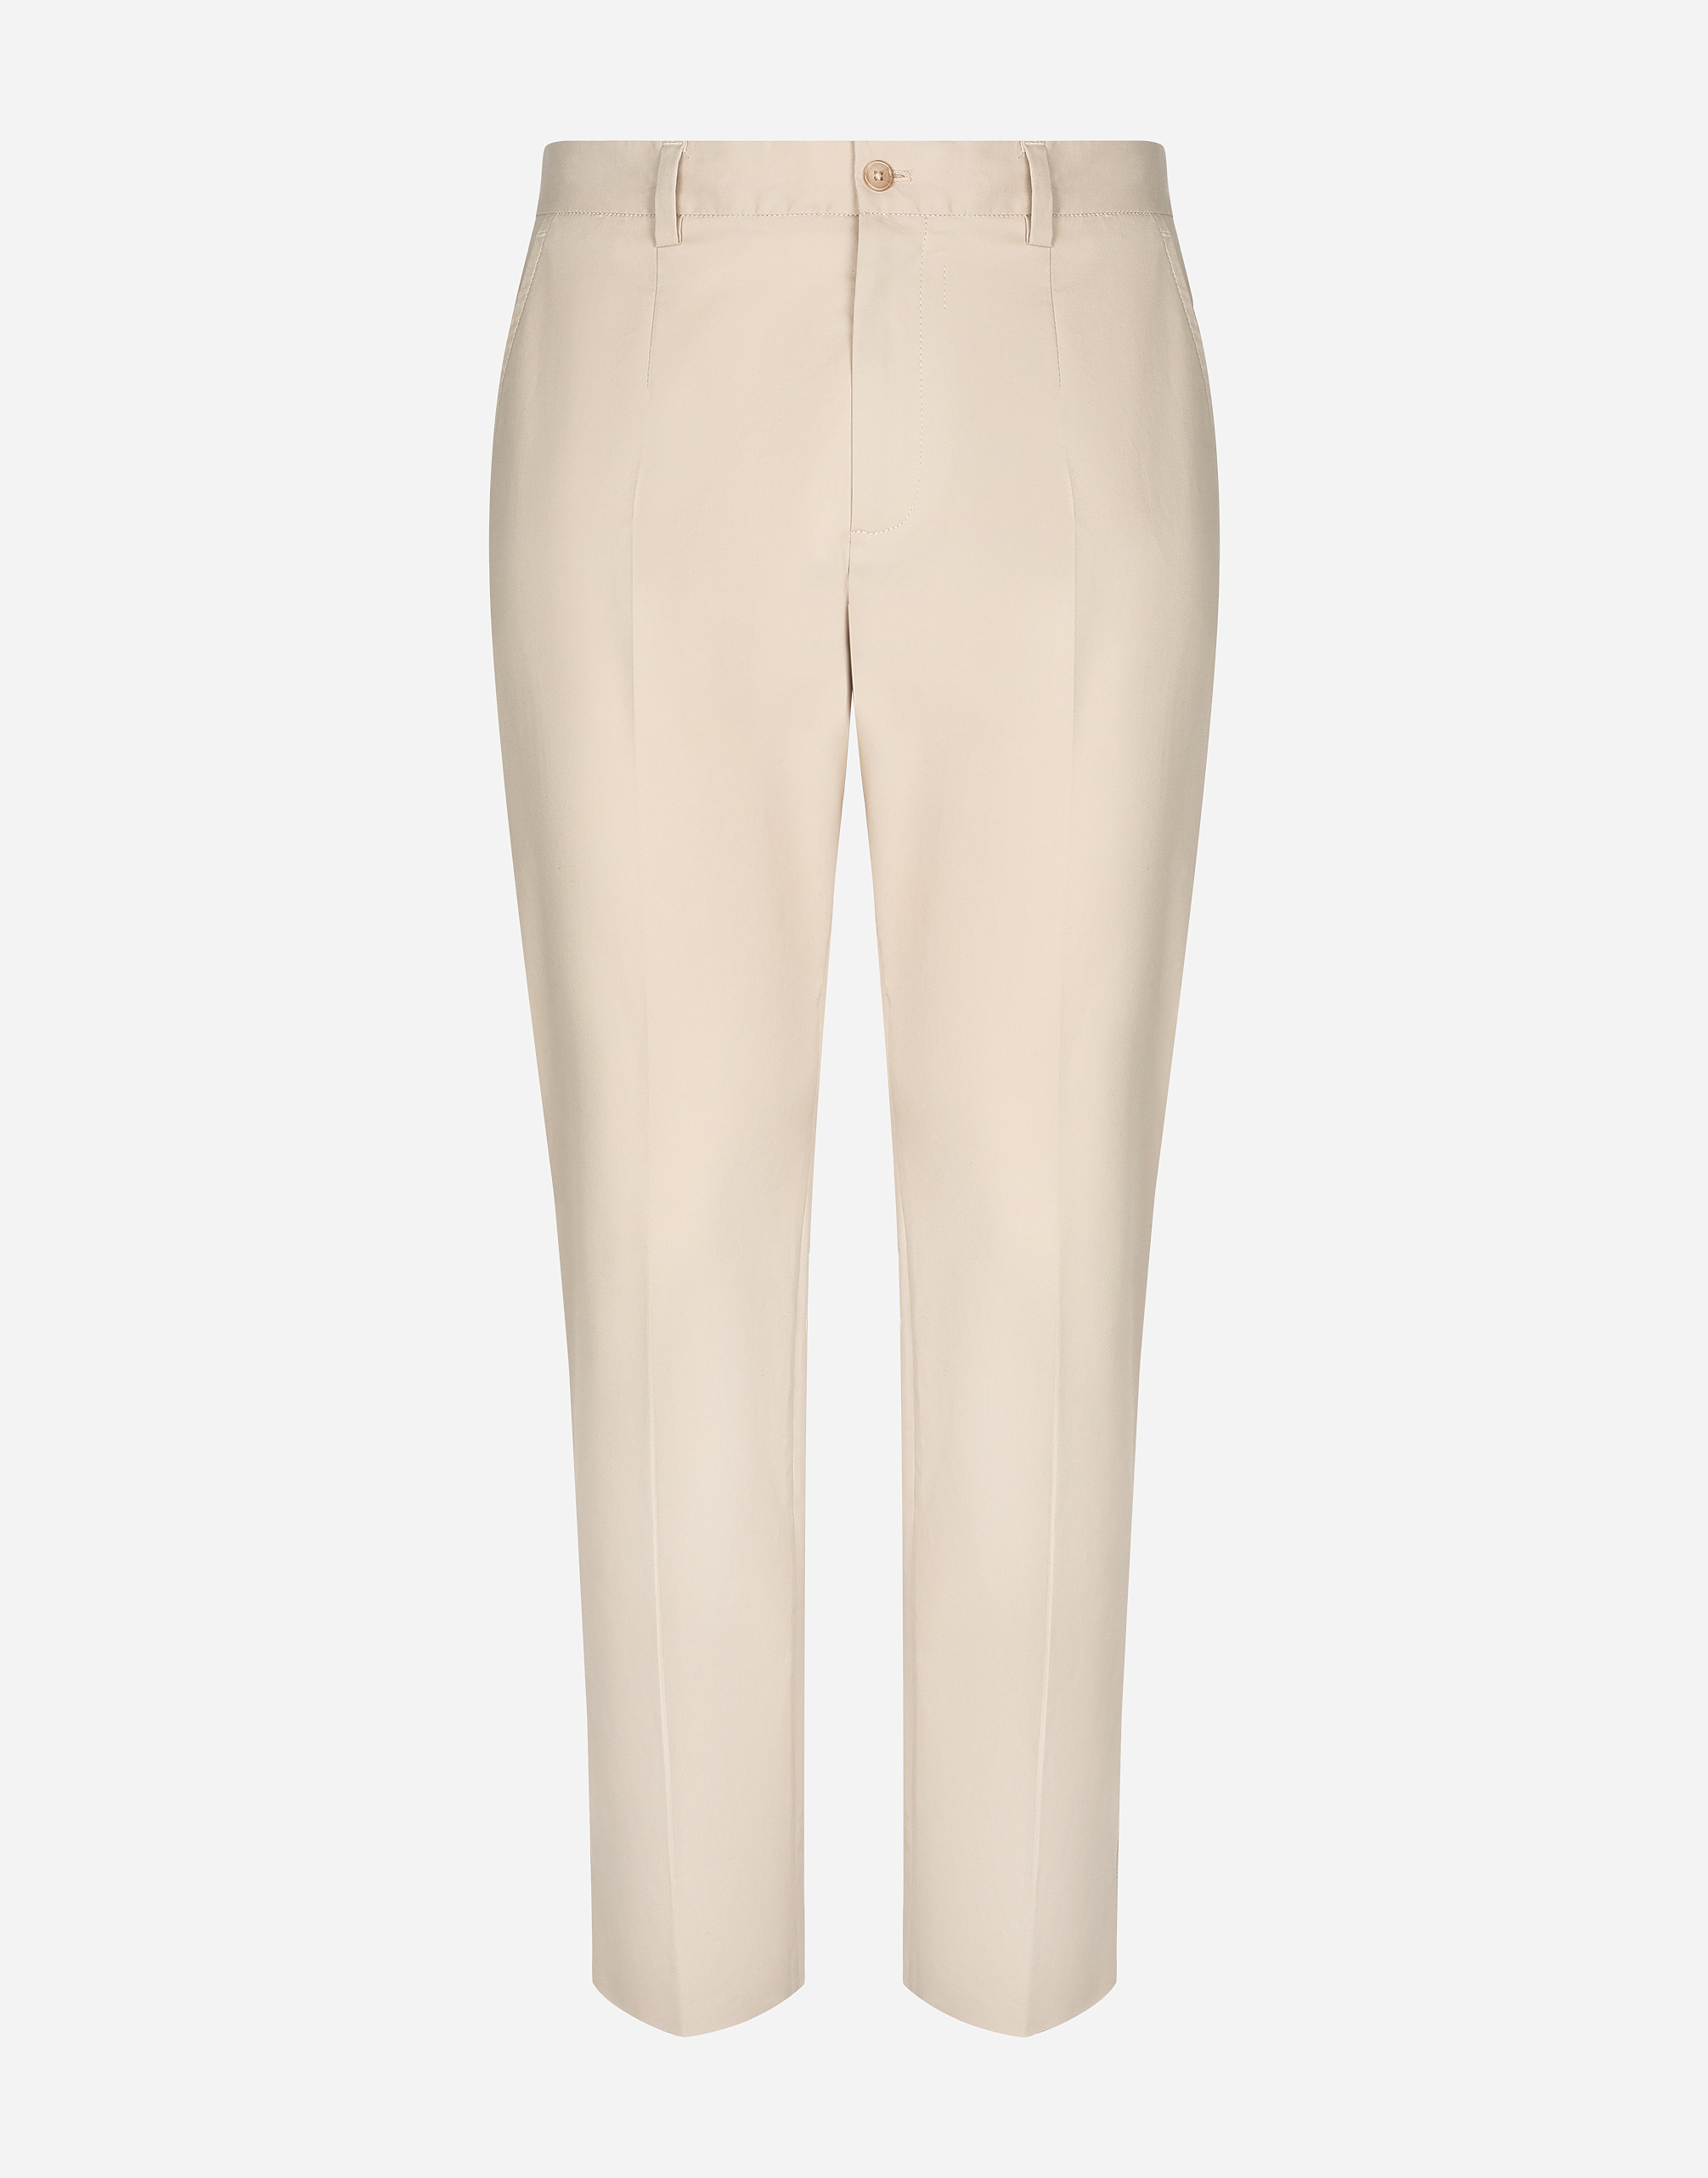 Stretch cotton pants with branded tag in Beige